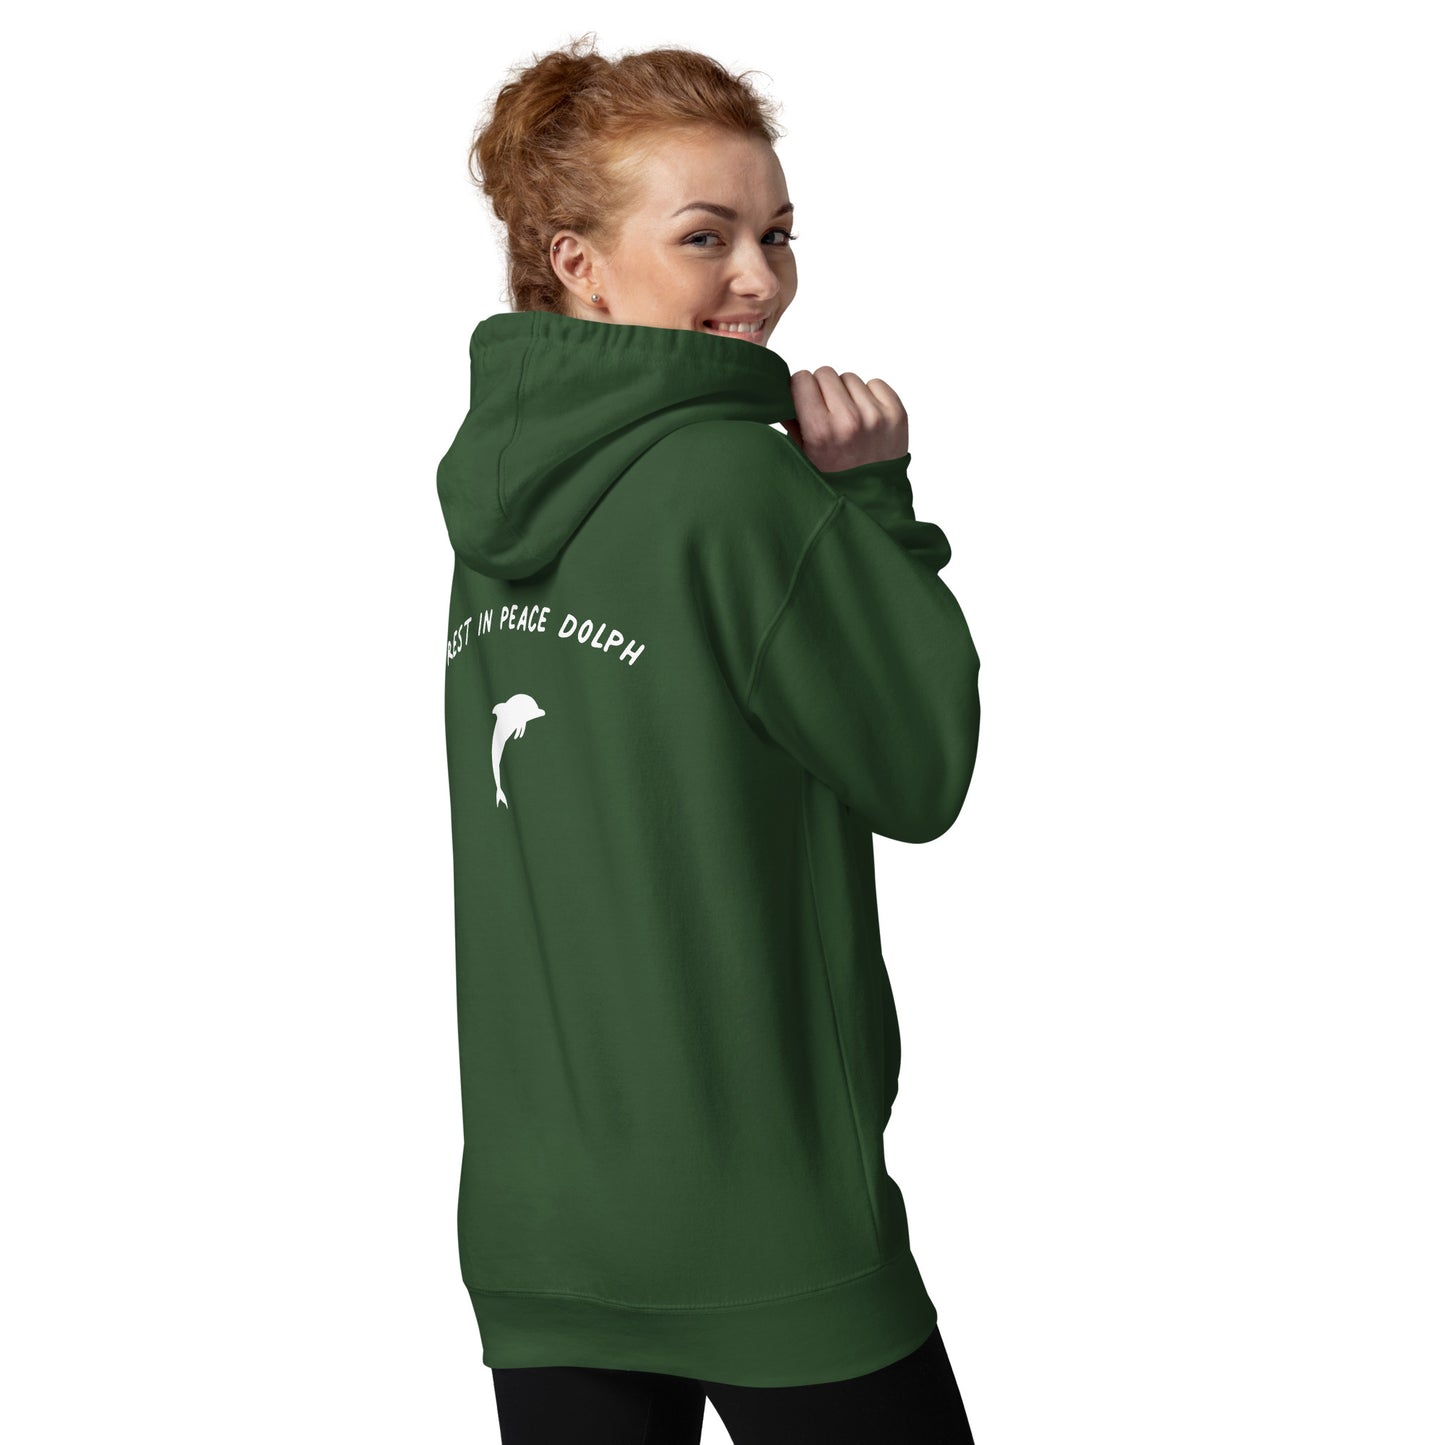 They Smile In Your Face / Rest In Peace Young Dolph Embroidered Unisex Hoodie